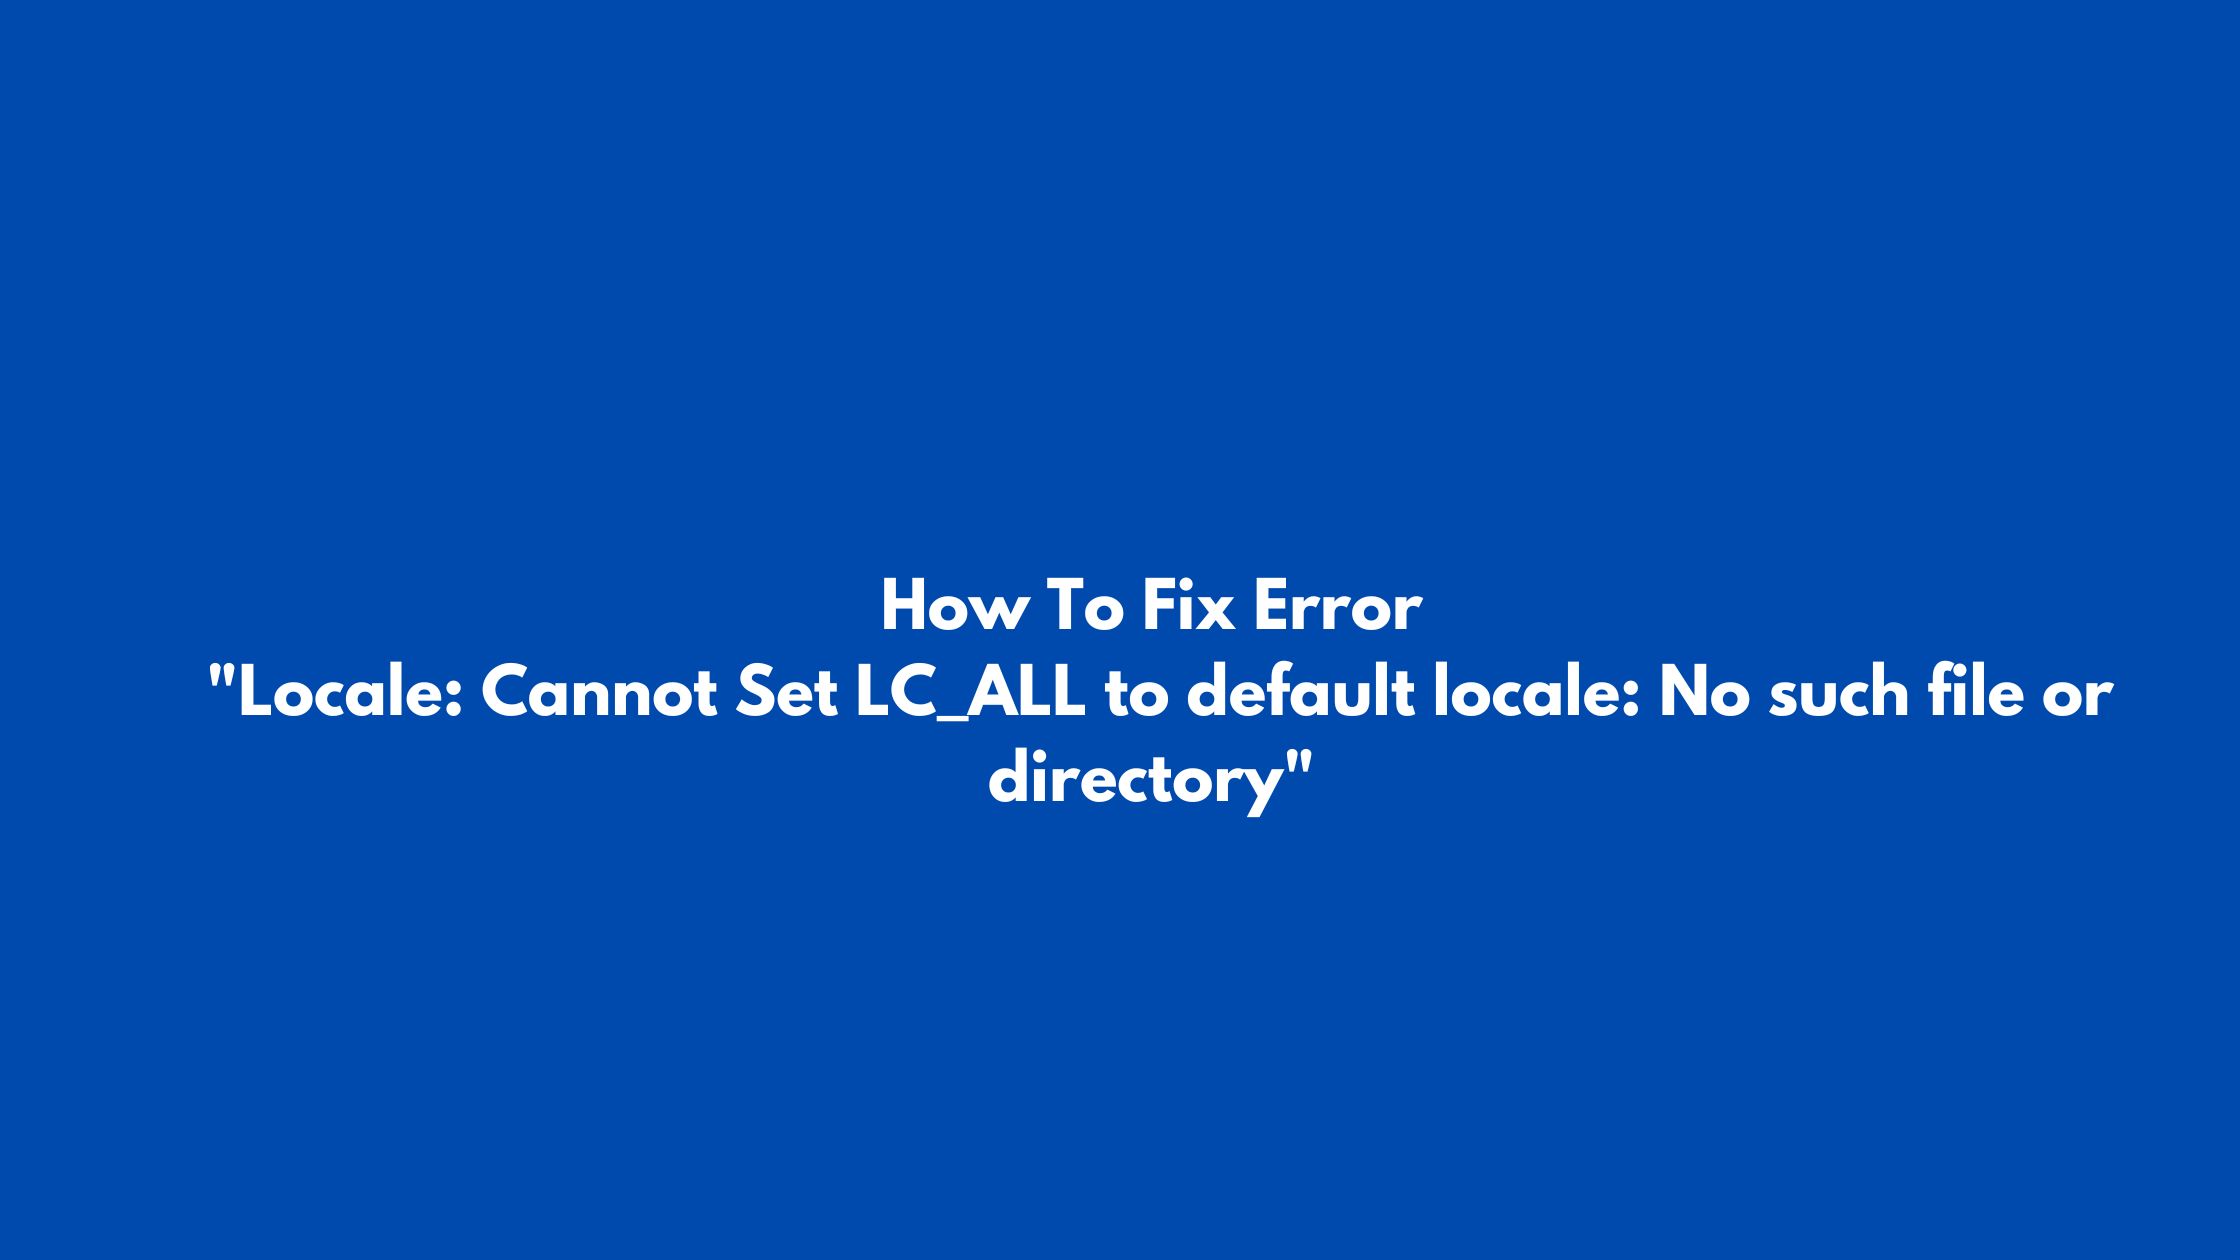 How To Fix Error "Locale: Cannot Set LC_ALL to default locale: No such file or directory"